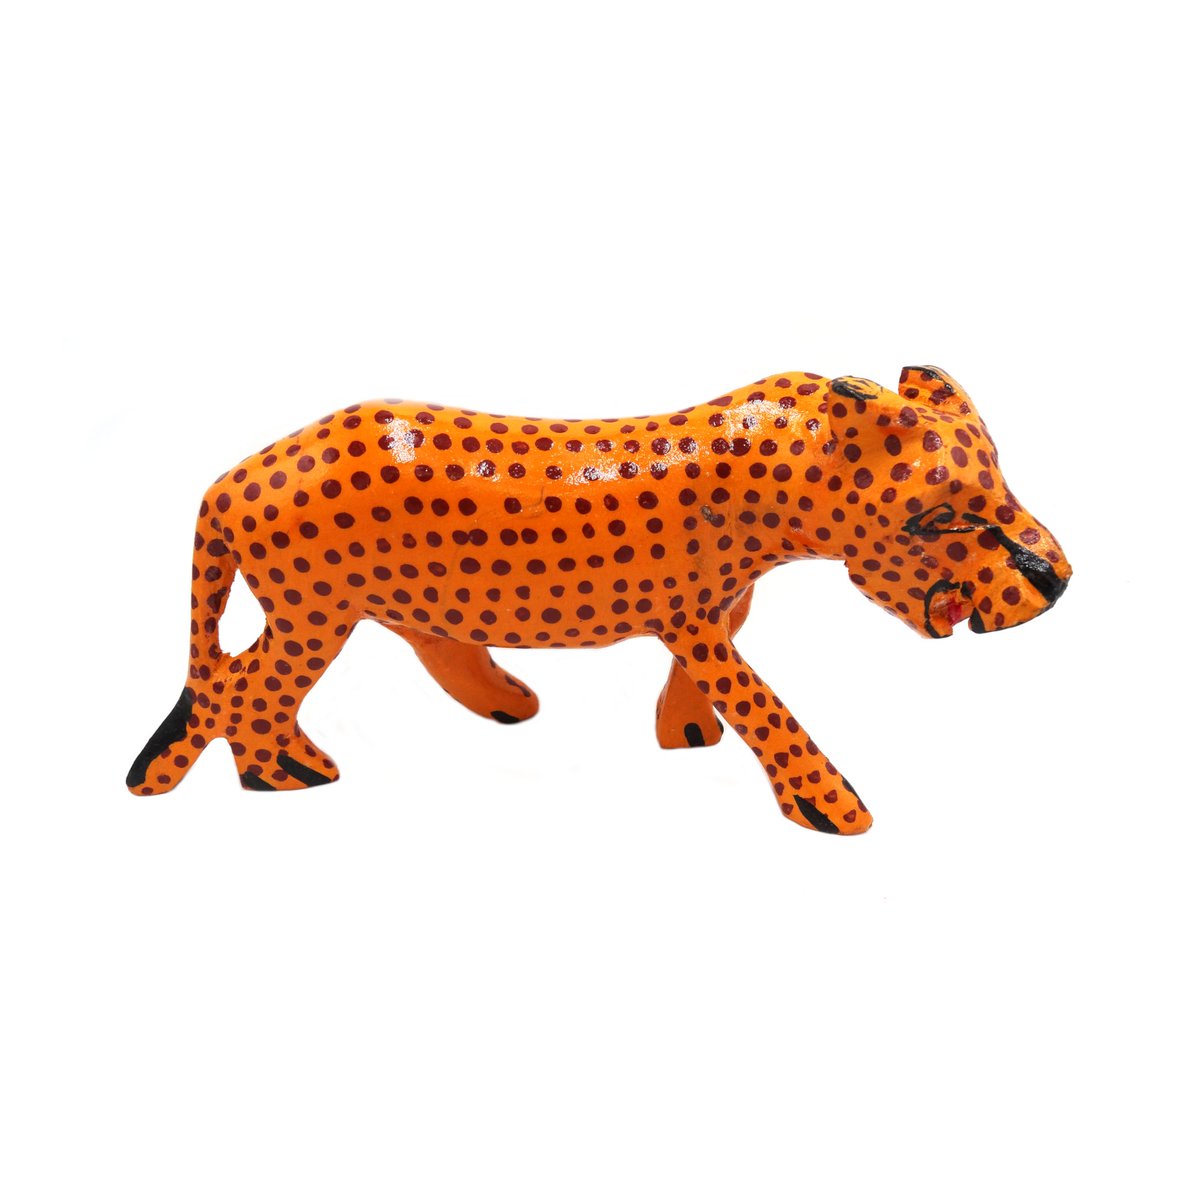 Buy now - leopard handmade from wood #etsy shop: afriartisan.etsy.com/listing/265855… #HandmadeHour #Wildlife #sculpture #figurine #knickknack #leopard #giftforhome #homedeco #Gift #craft #onlinecraft #etsysale #etsygifts #UKGiftHour #shopsmall #shop #online bit.ly/4aa0QlX